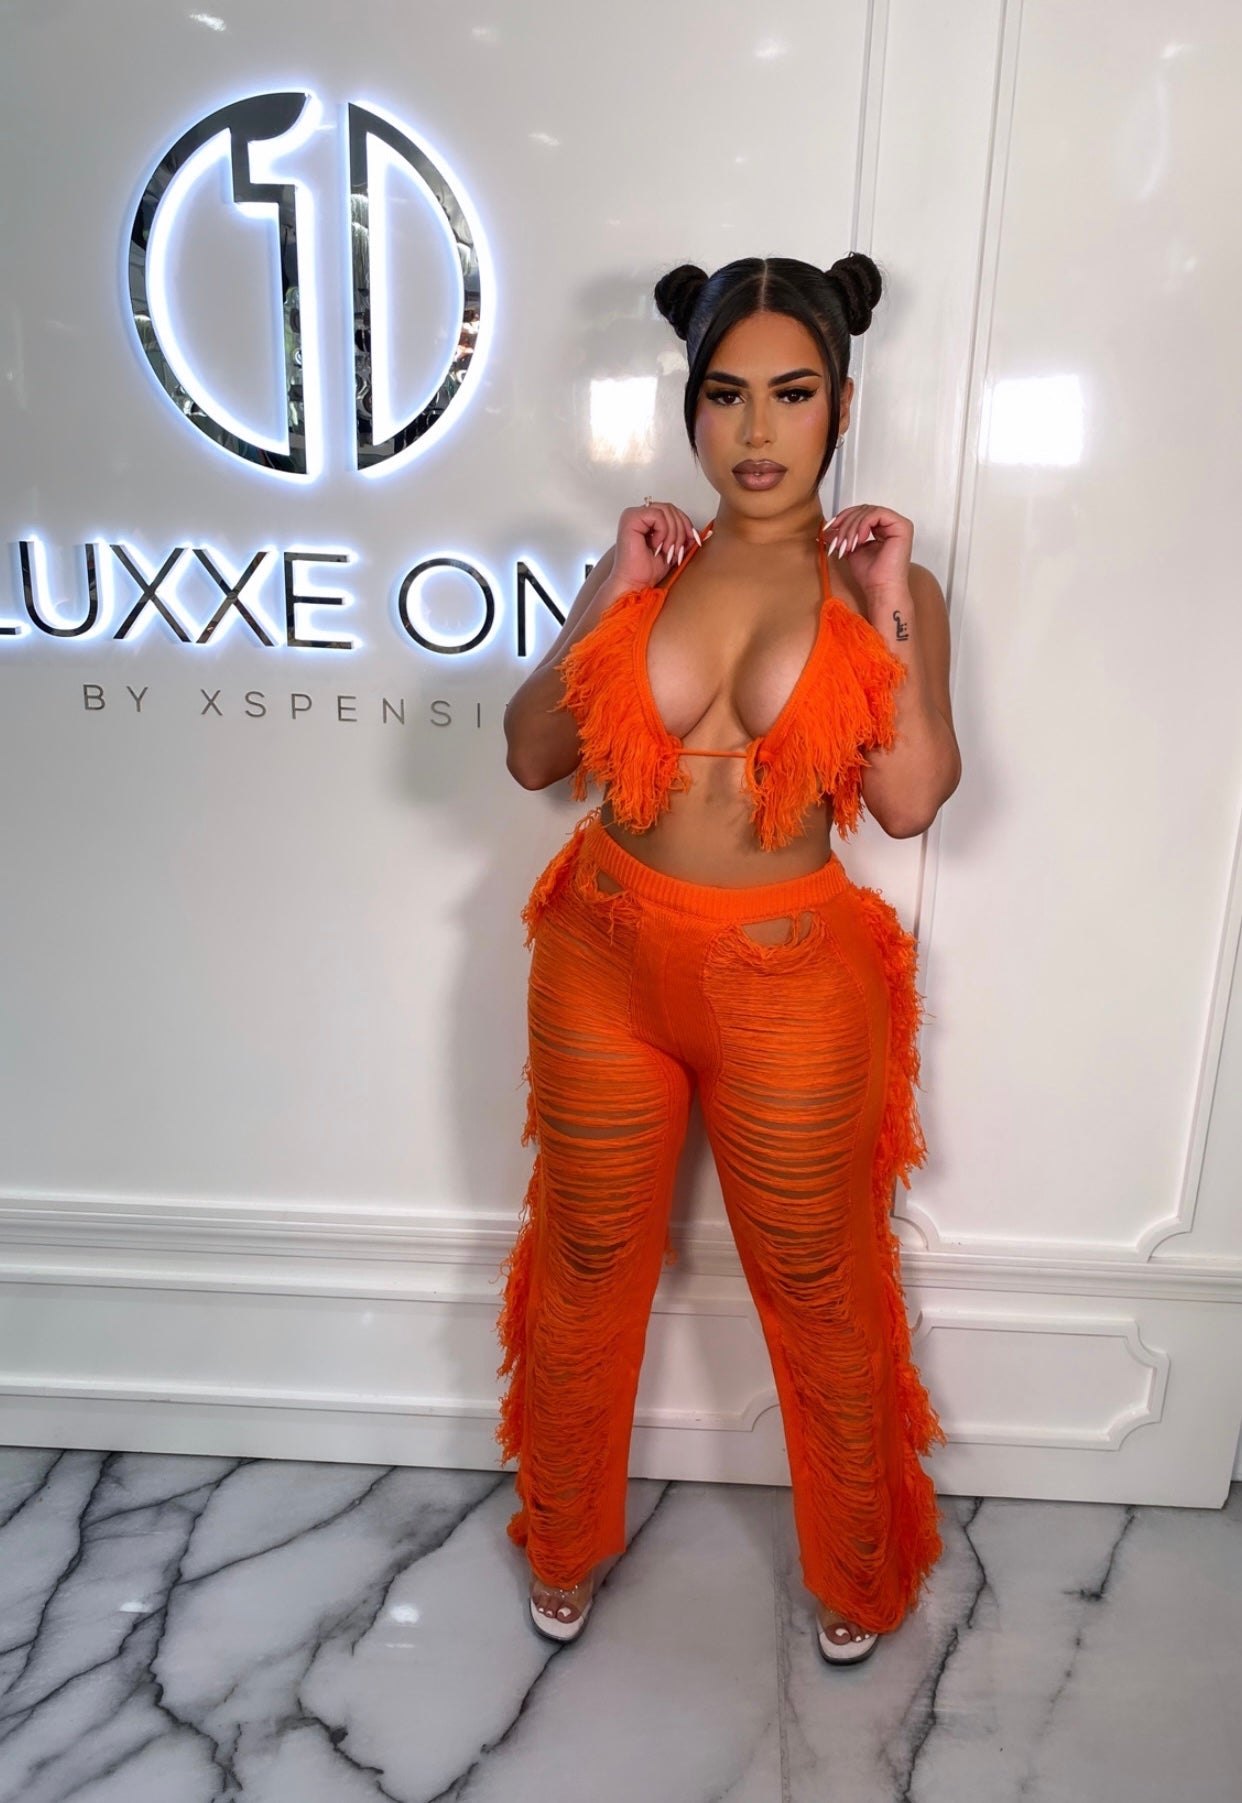 "Belle" Two Piece - Luxxe One